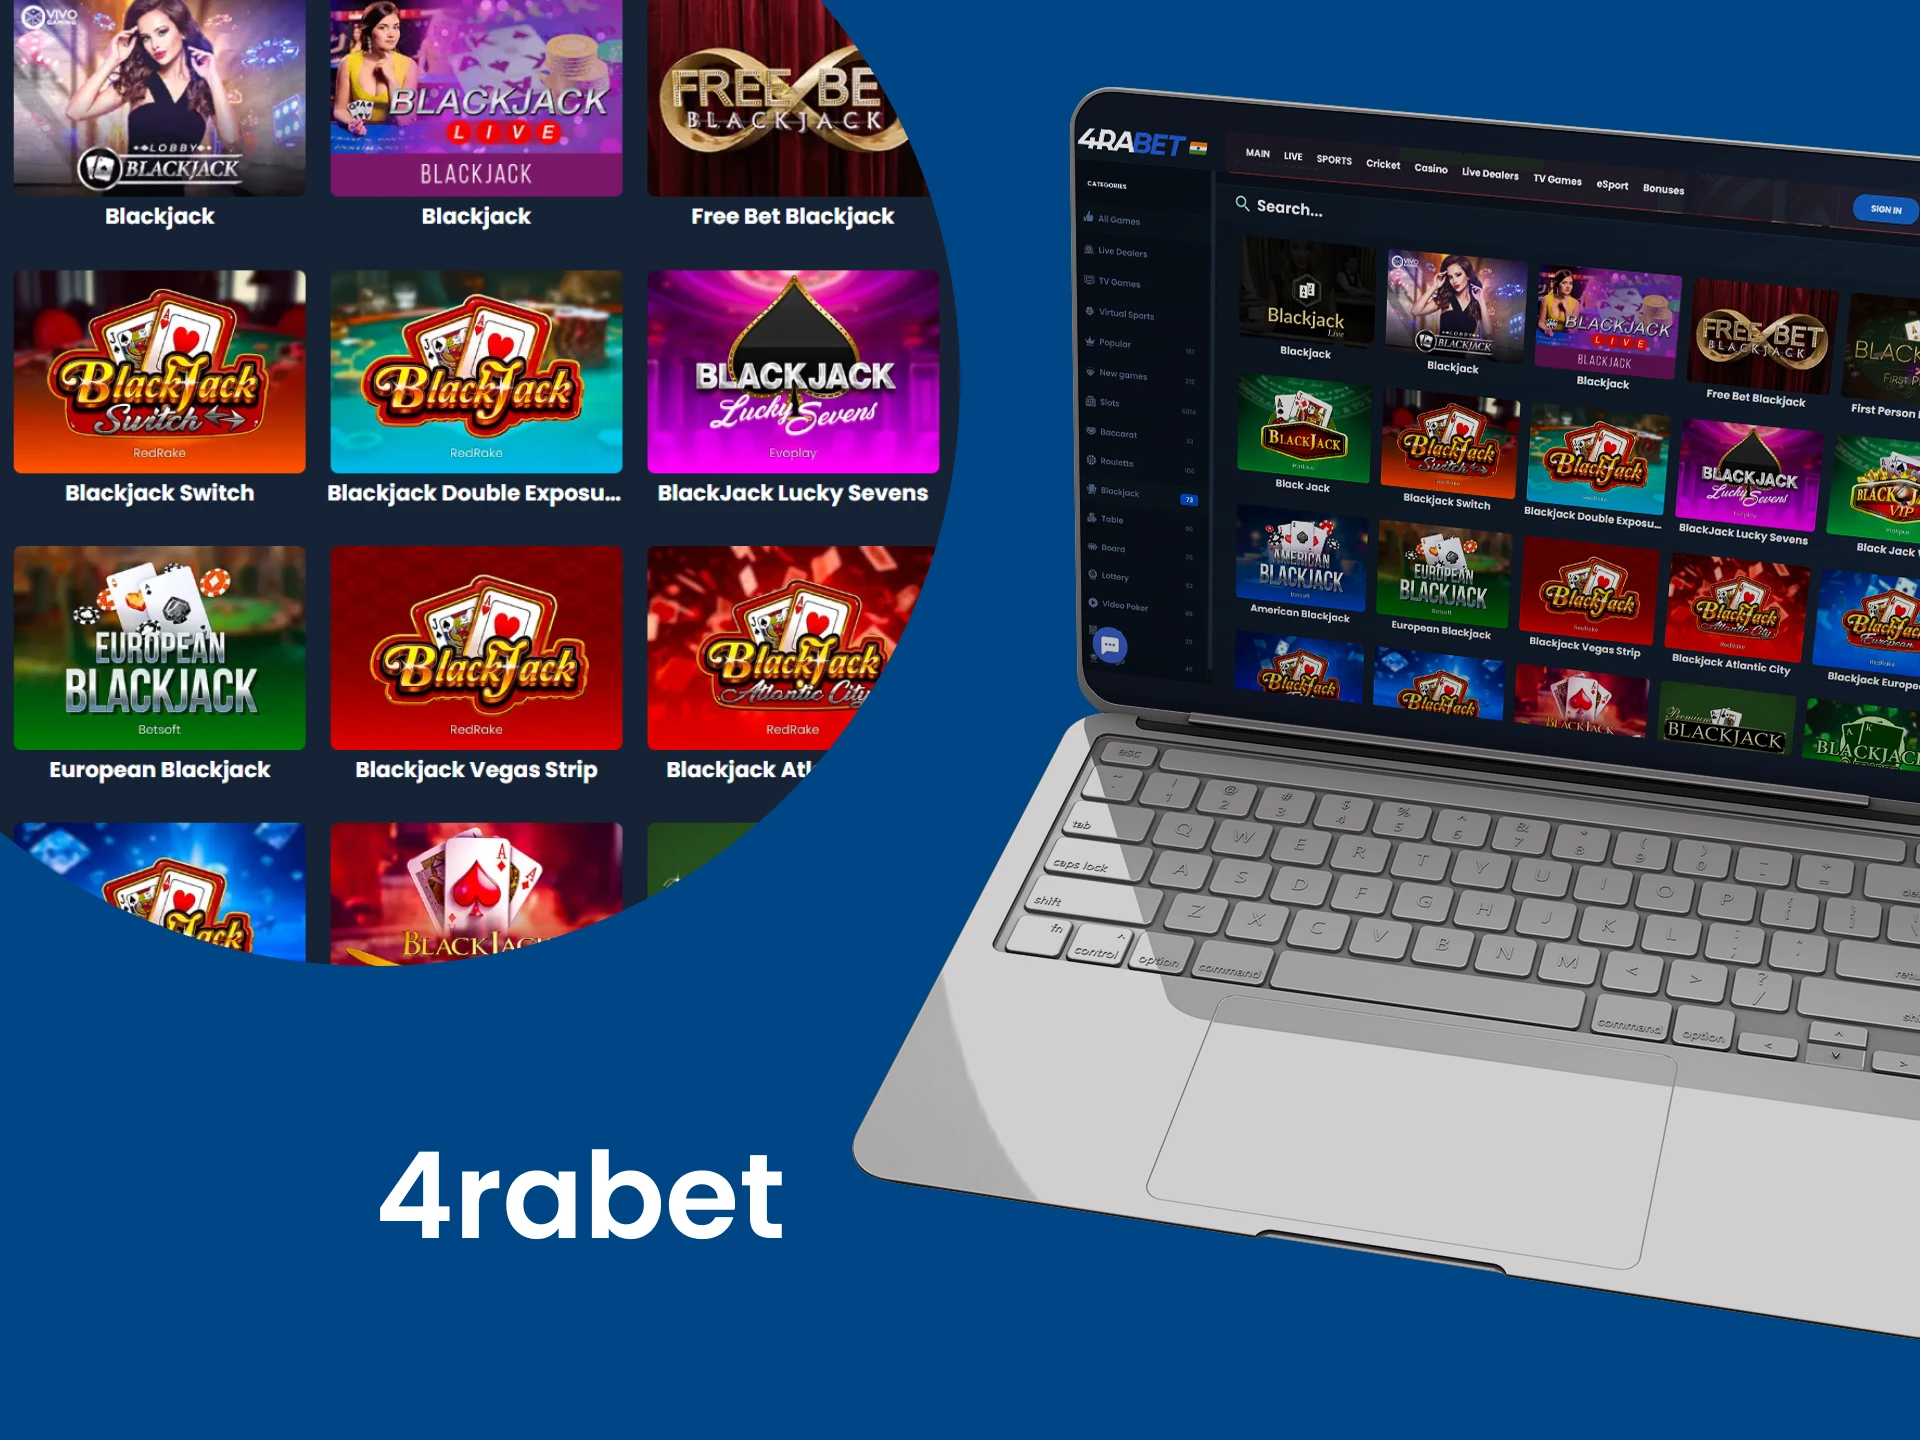 Choose from different types of table blackjack games at 4rabet.